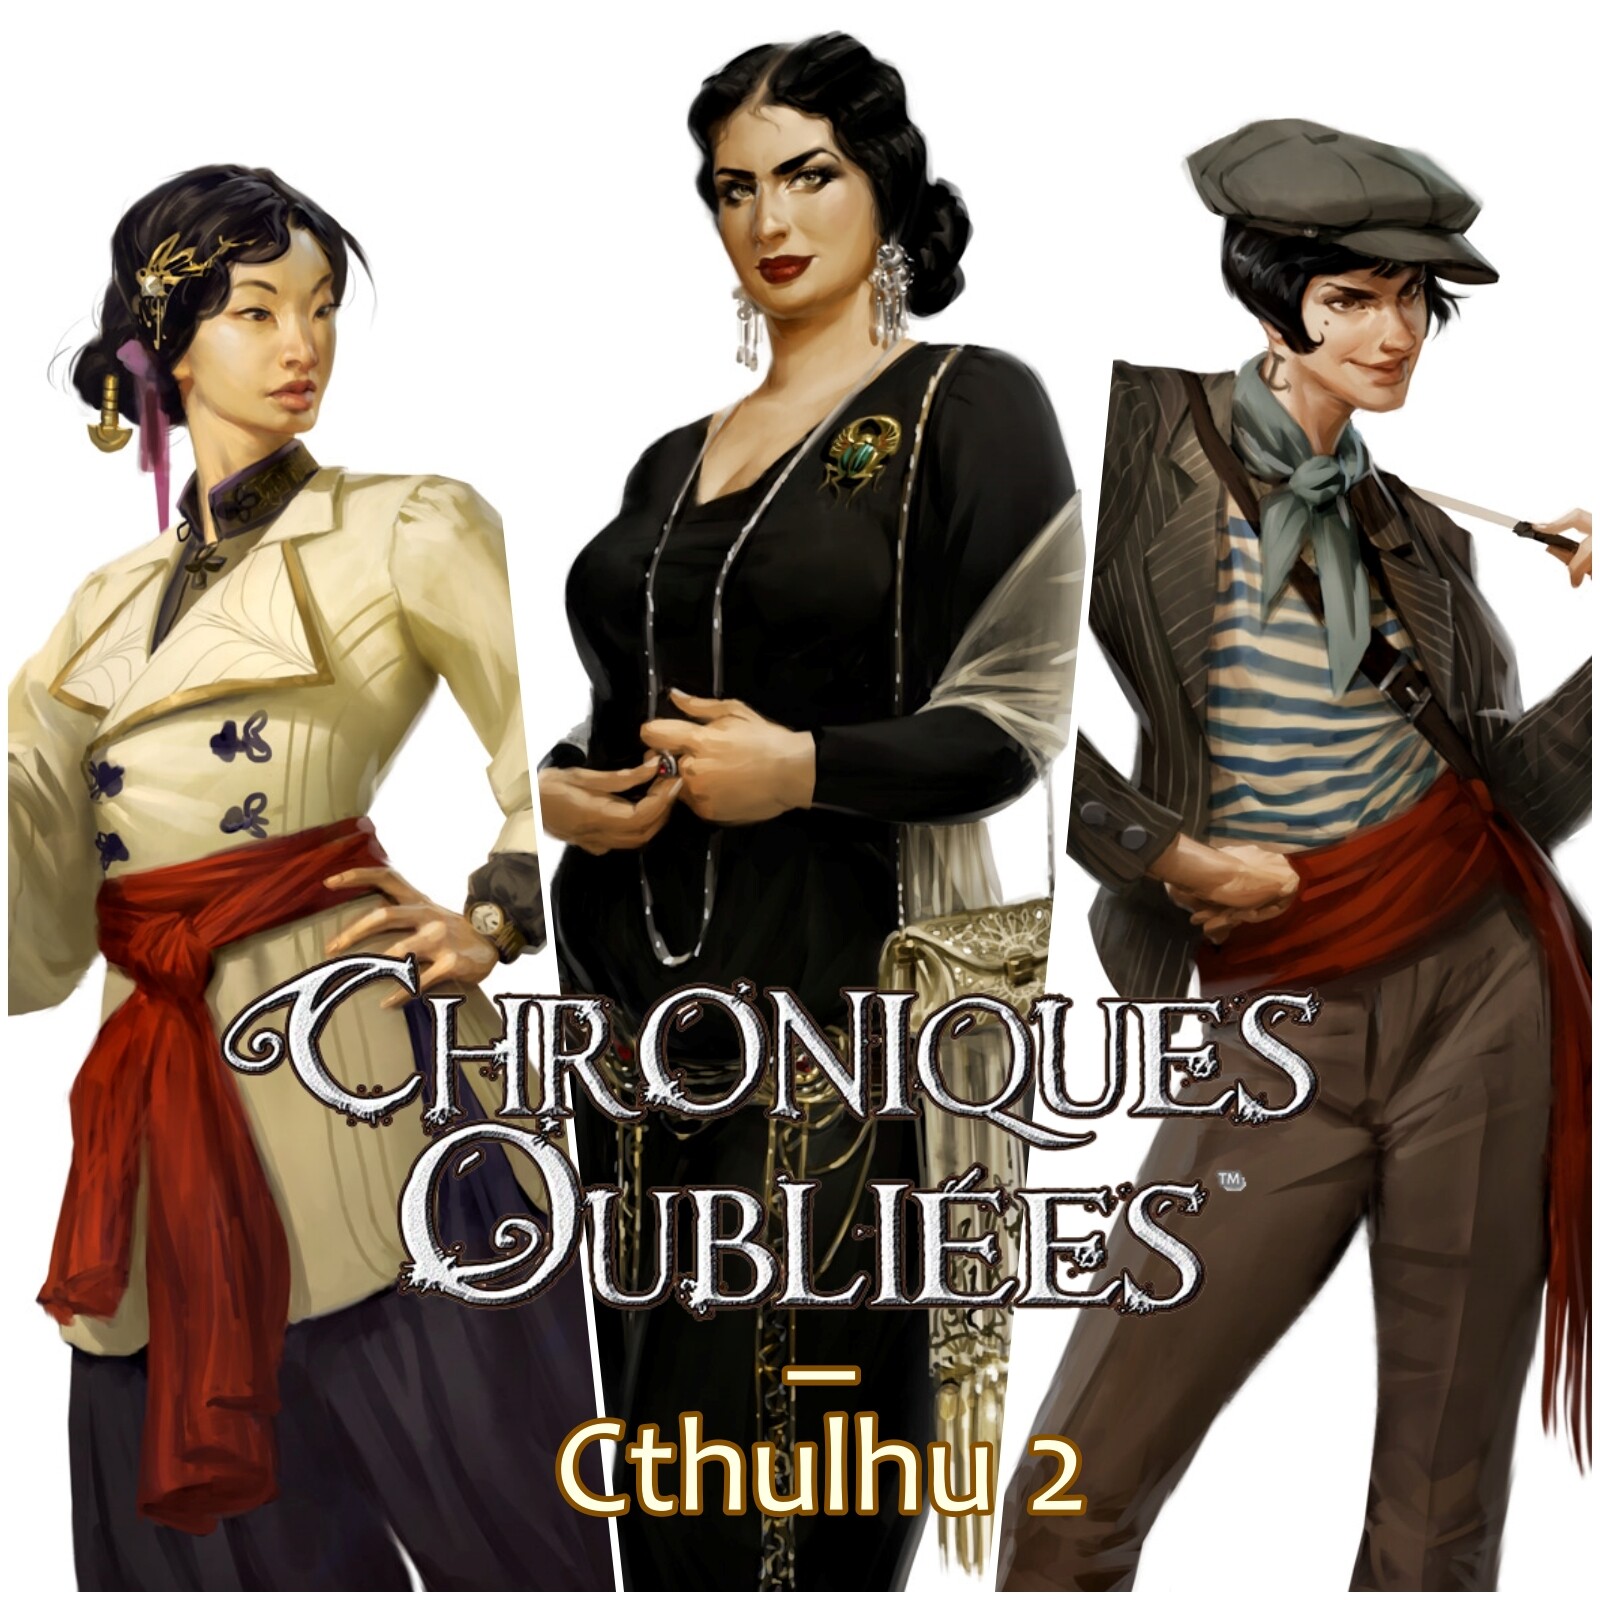 Chroniques Oubliées: Cthulhu 2 - Characters